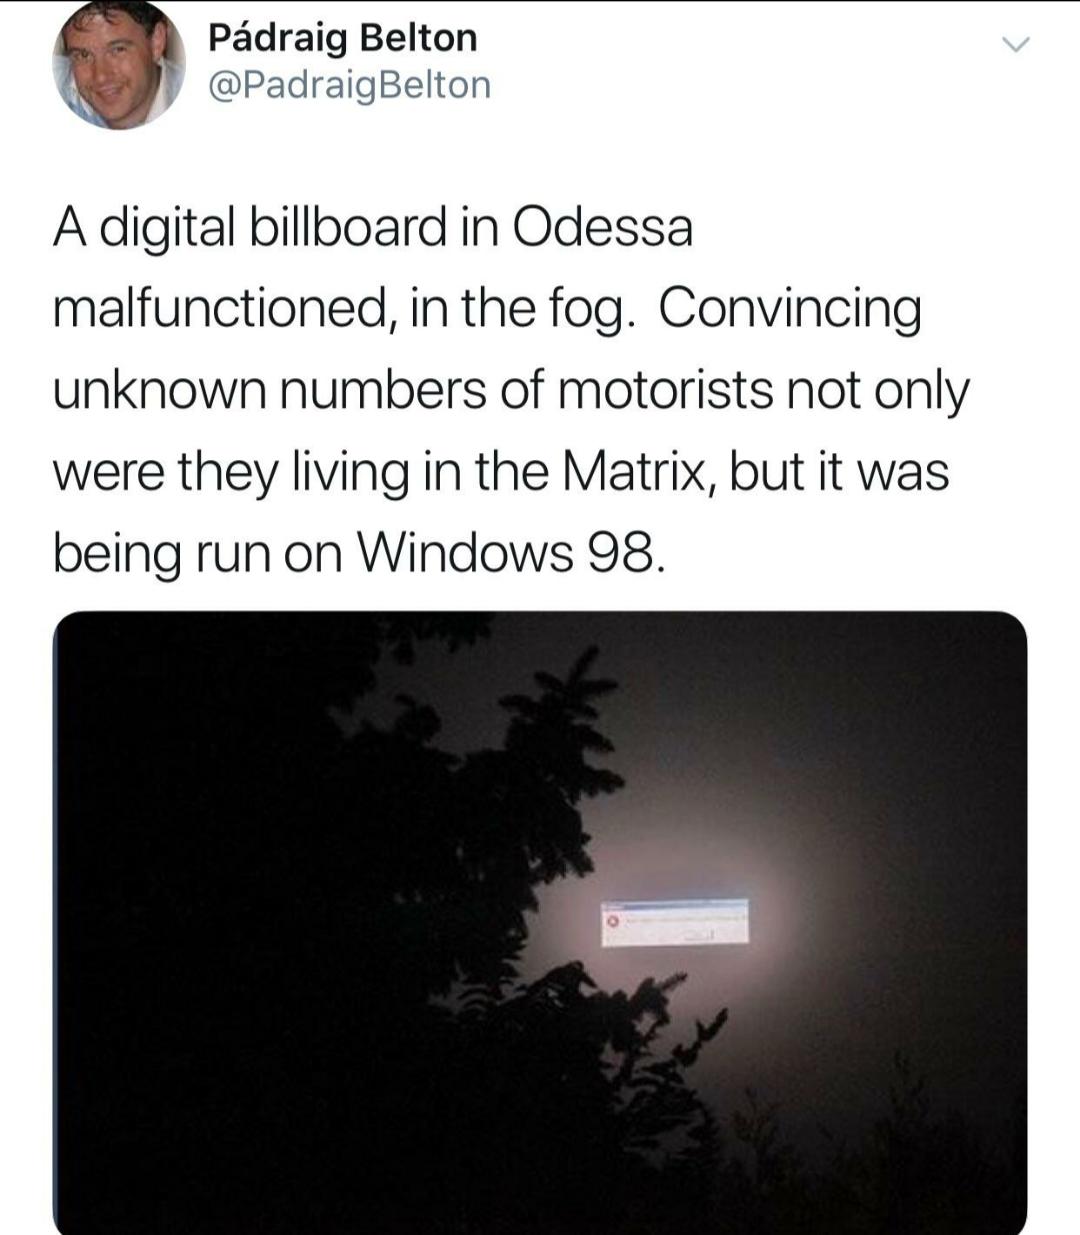 angle - Pdraig Belton A digital billboard in Odessa malfunctioned, in the fog. Convincing unknown numbers of motorists not only were they living in the Matrix, but it was being run on Windows 98.